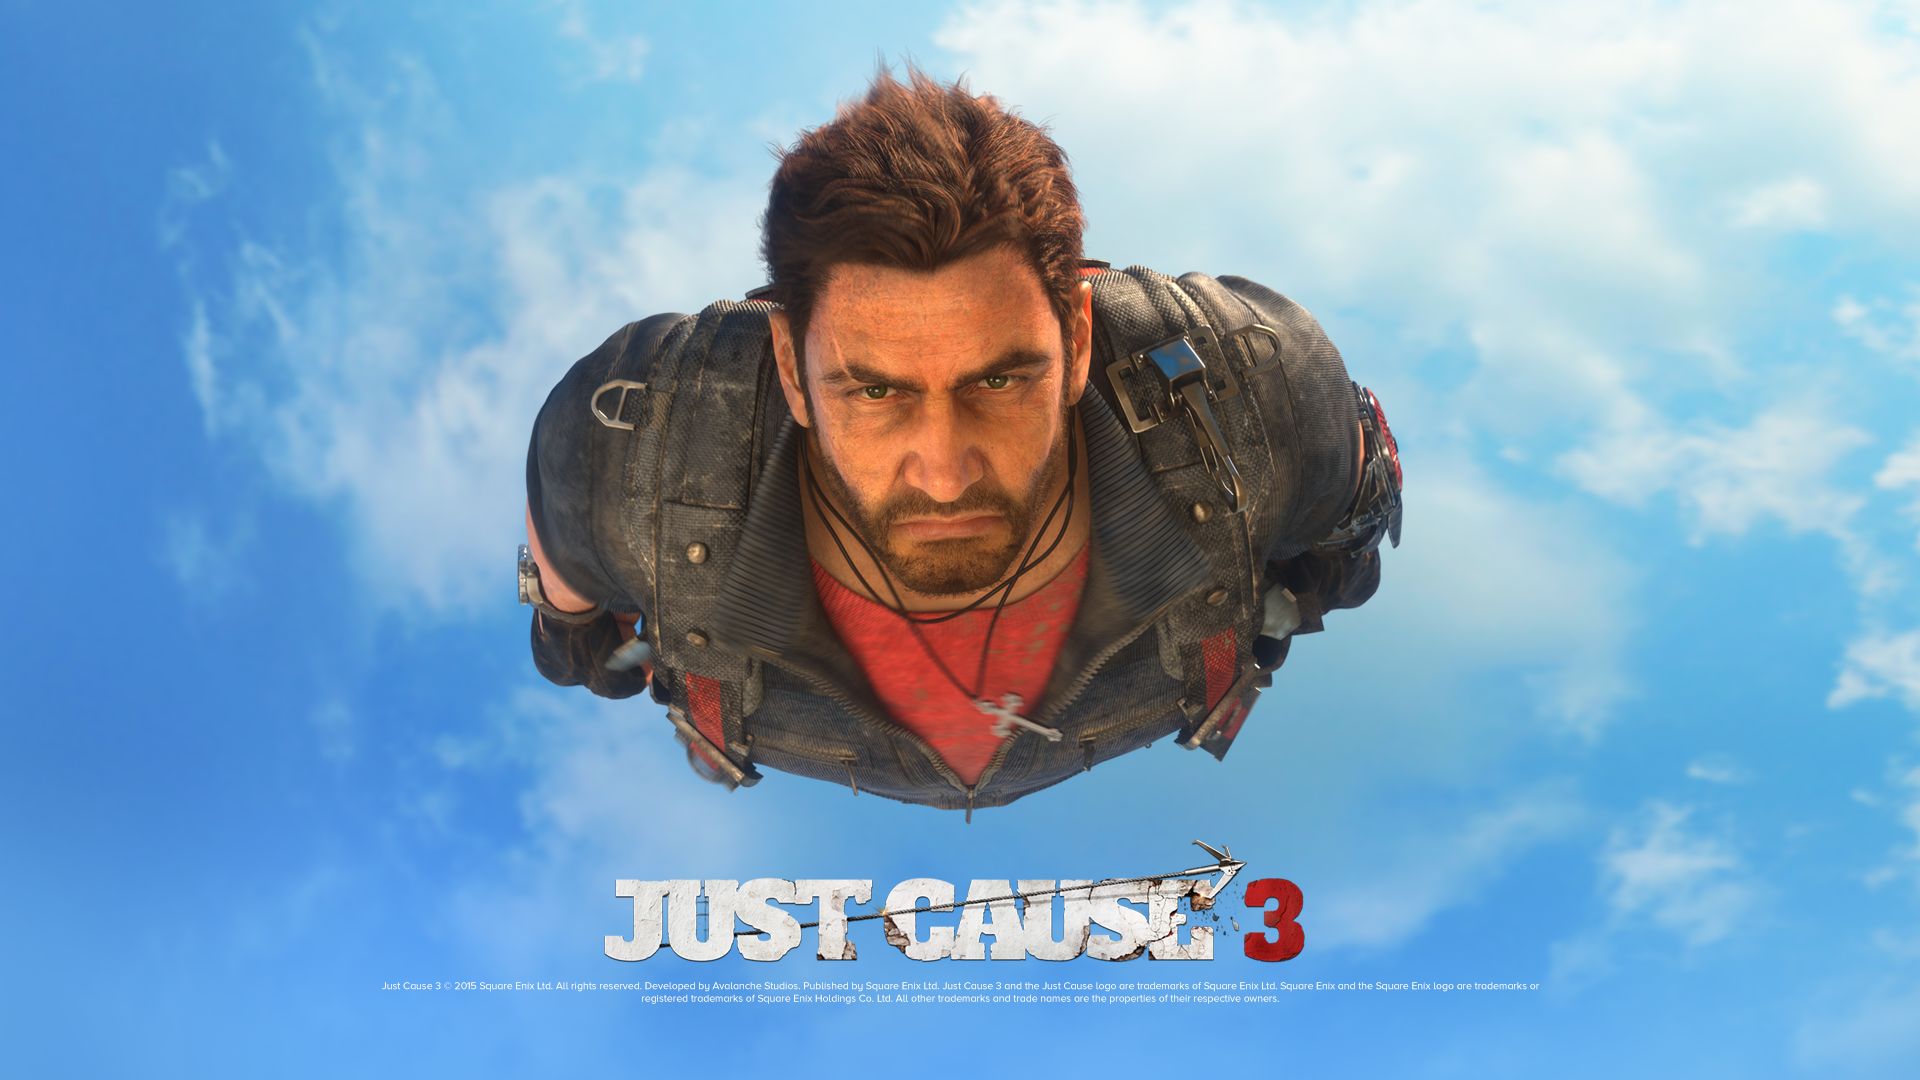 just cause 3, video game, rico rodriguez (just cause), just cause HD wallpaper